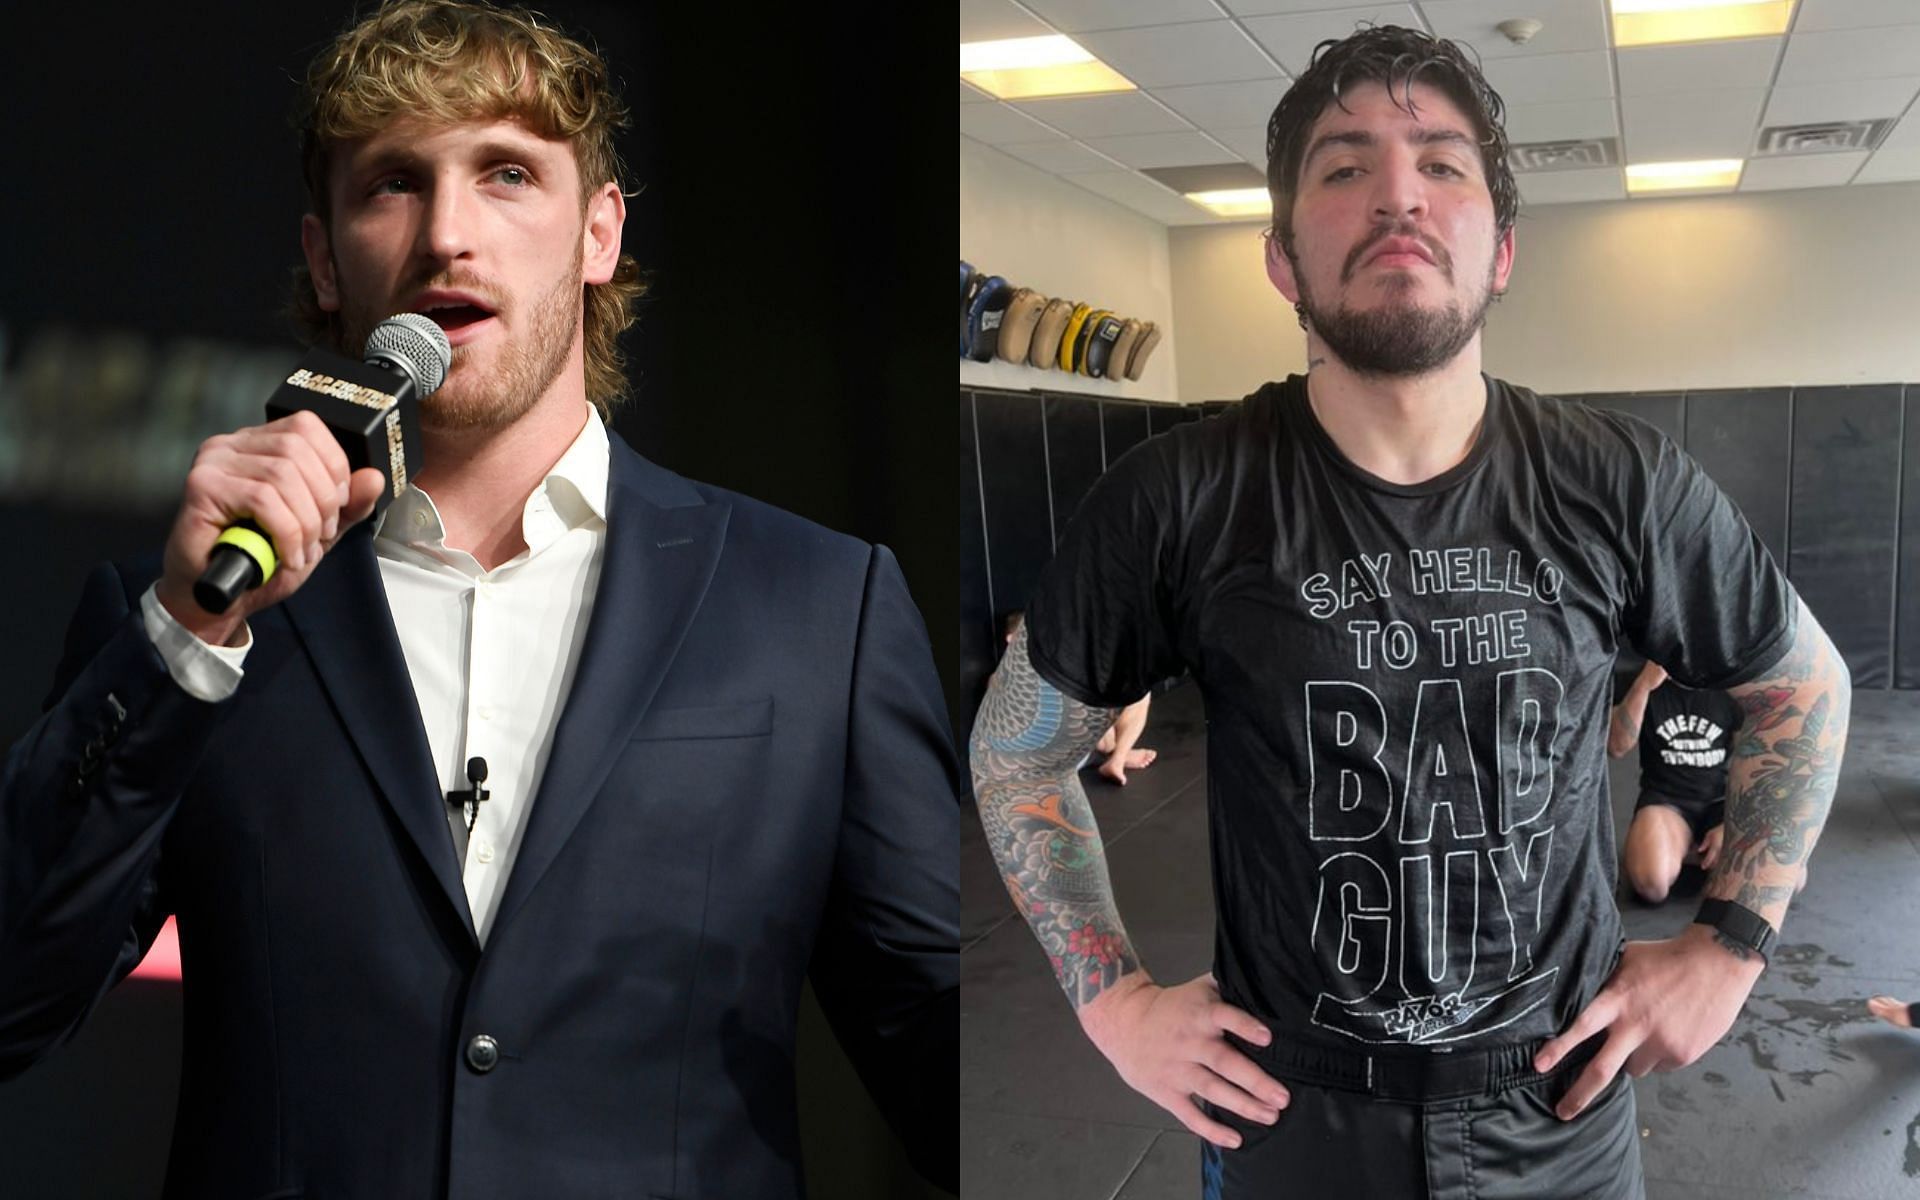 Logan Paul (left) and Dillon Danis (right) (Image credits Getty and @dillondanis on Twitter)